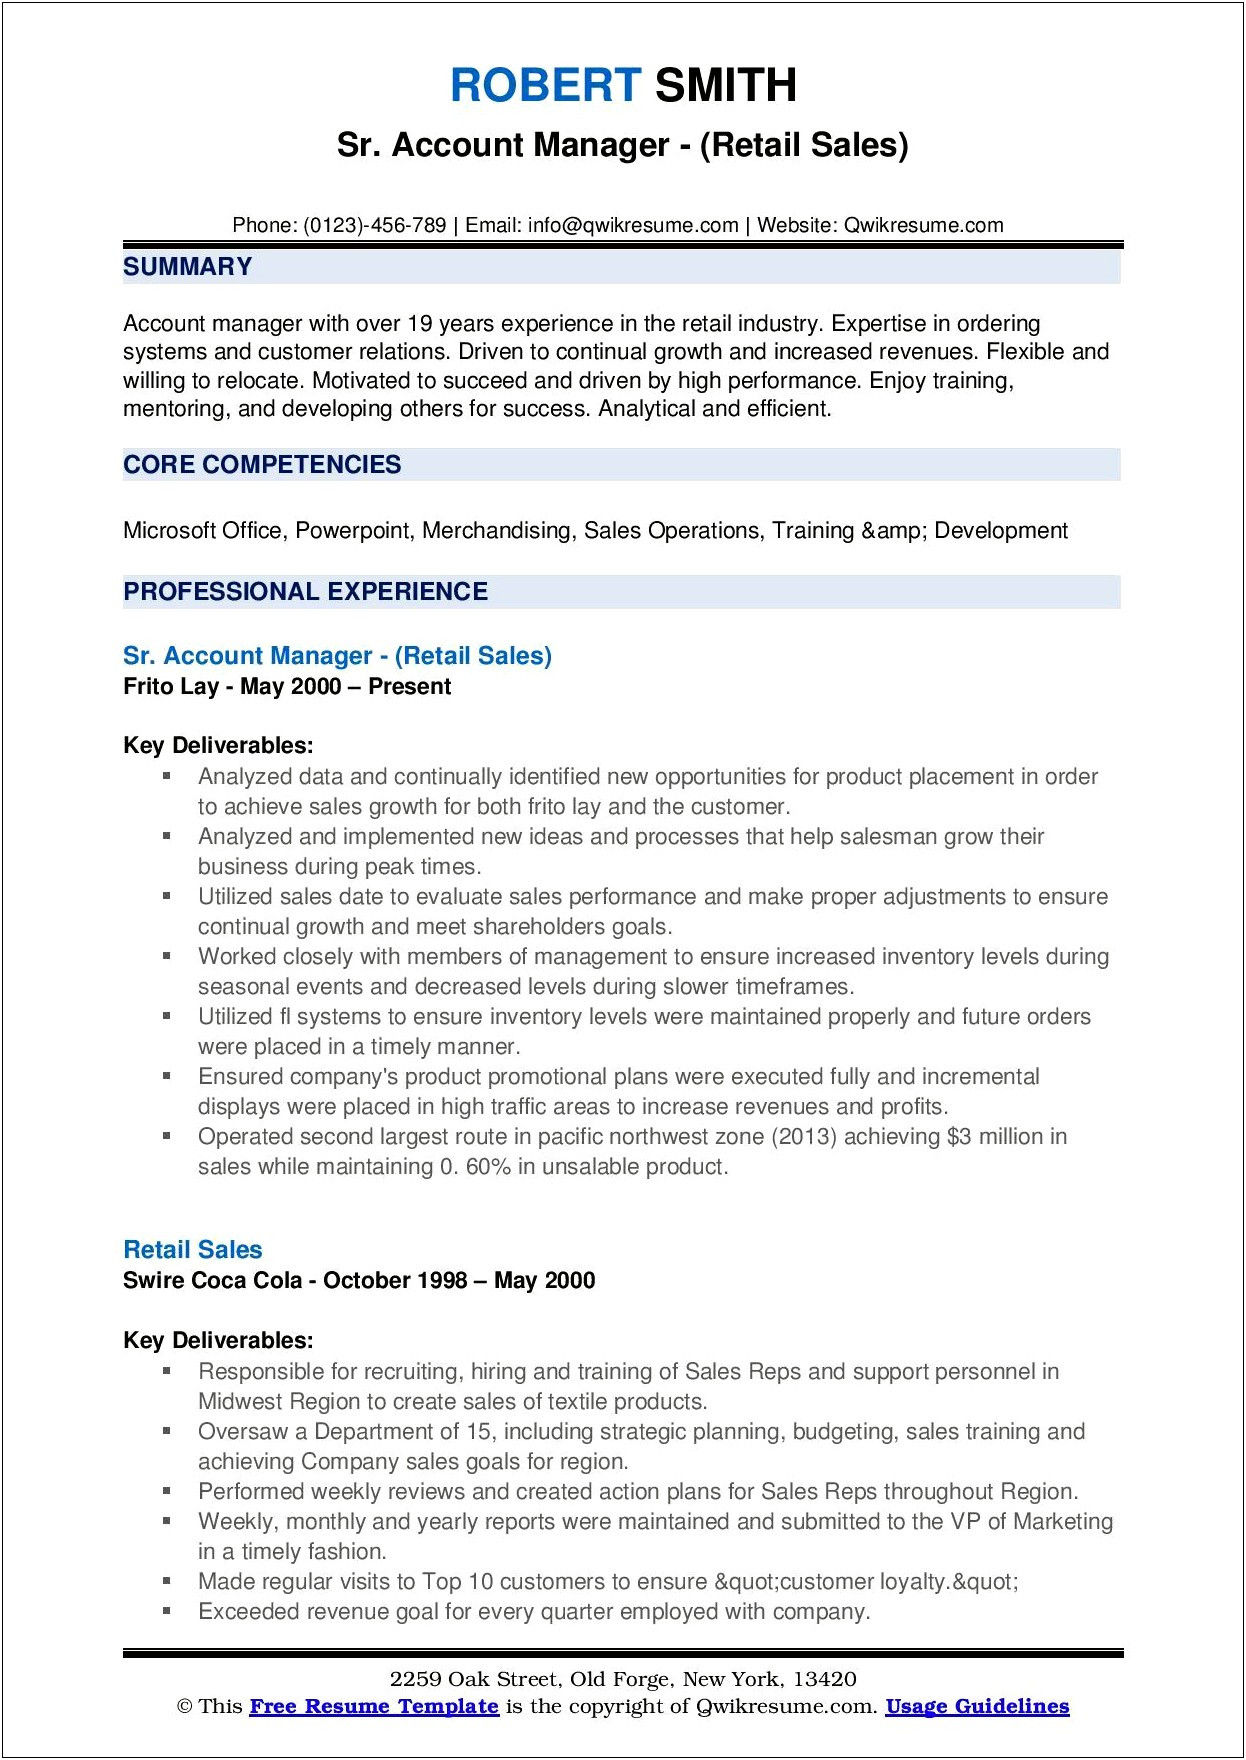 Skills For A Retail Manager Resume